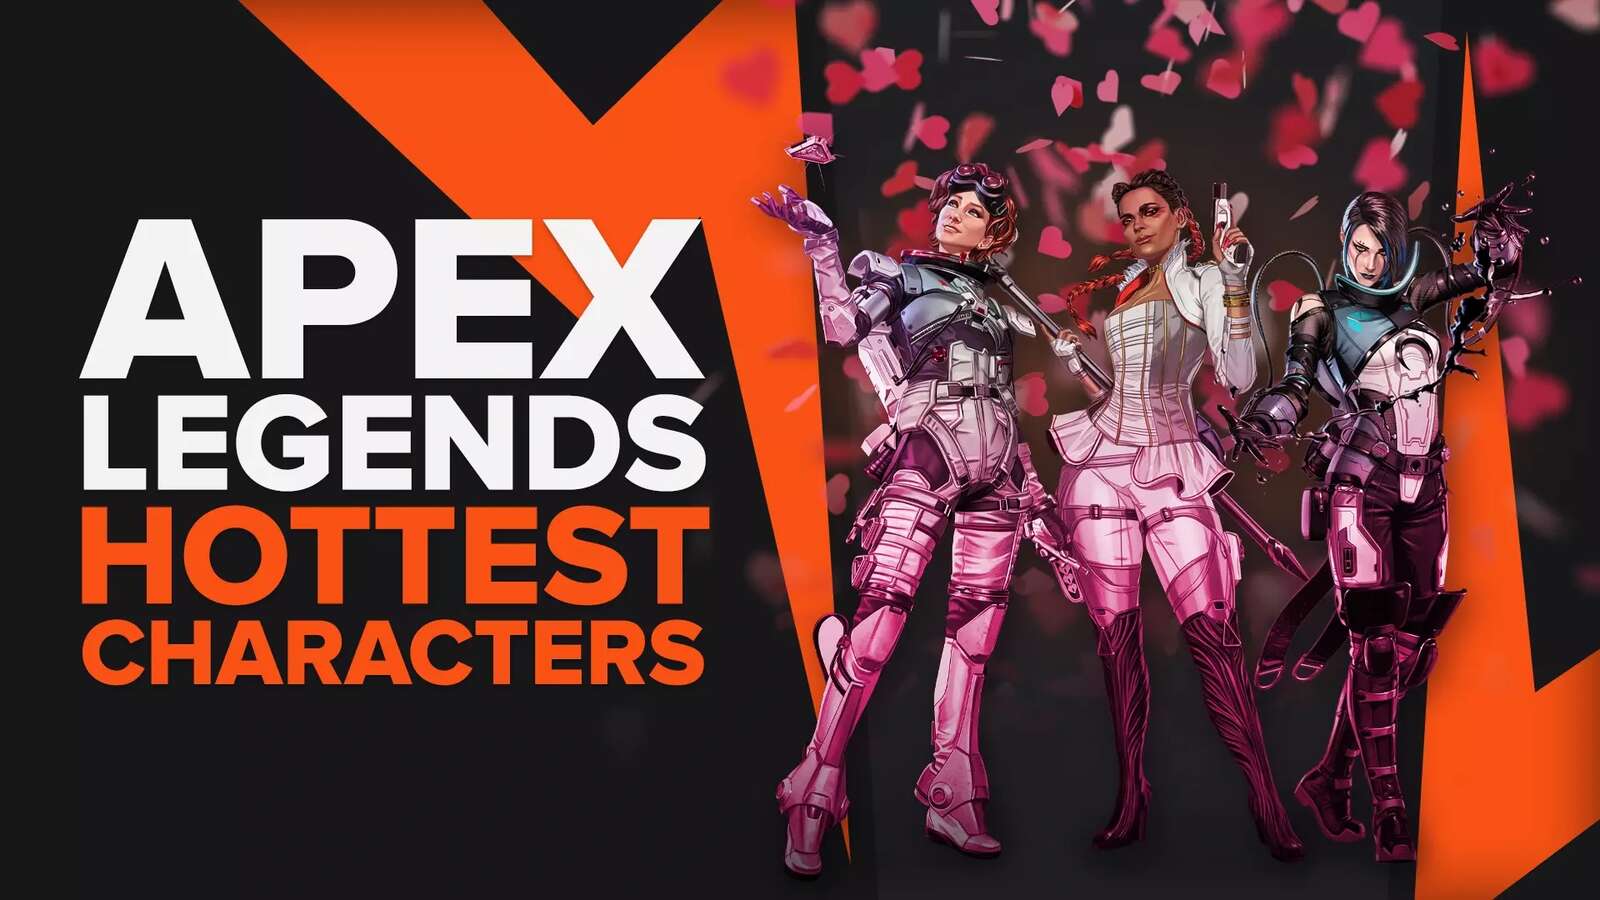 7 Hottest Characters in Apex Legends That Are to Die For